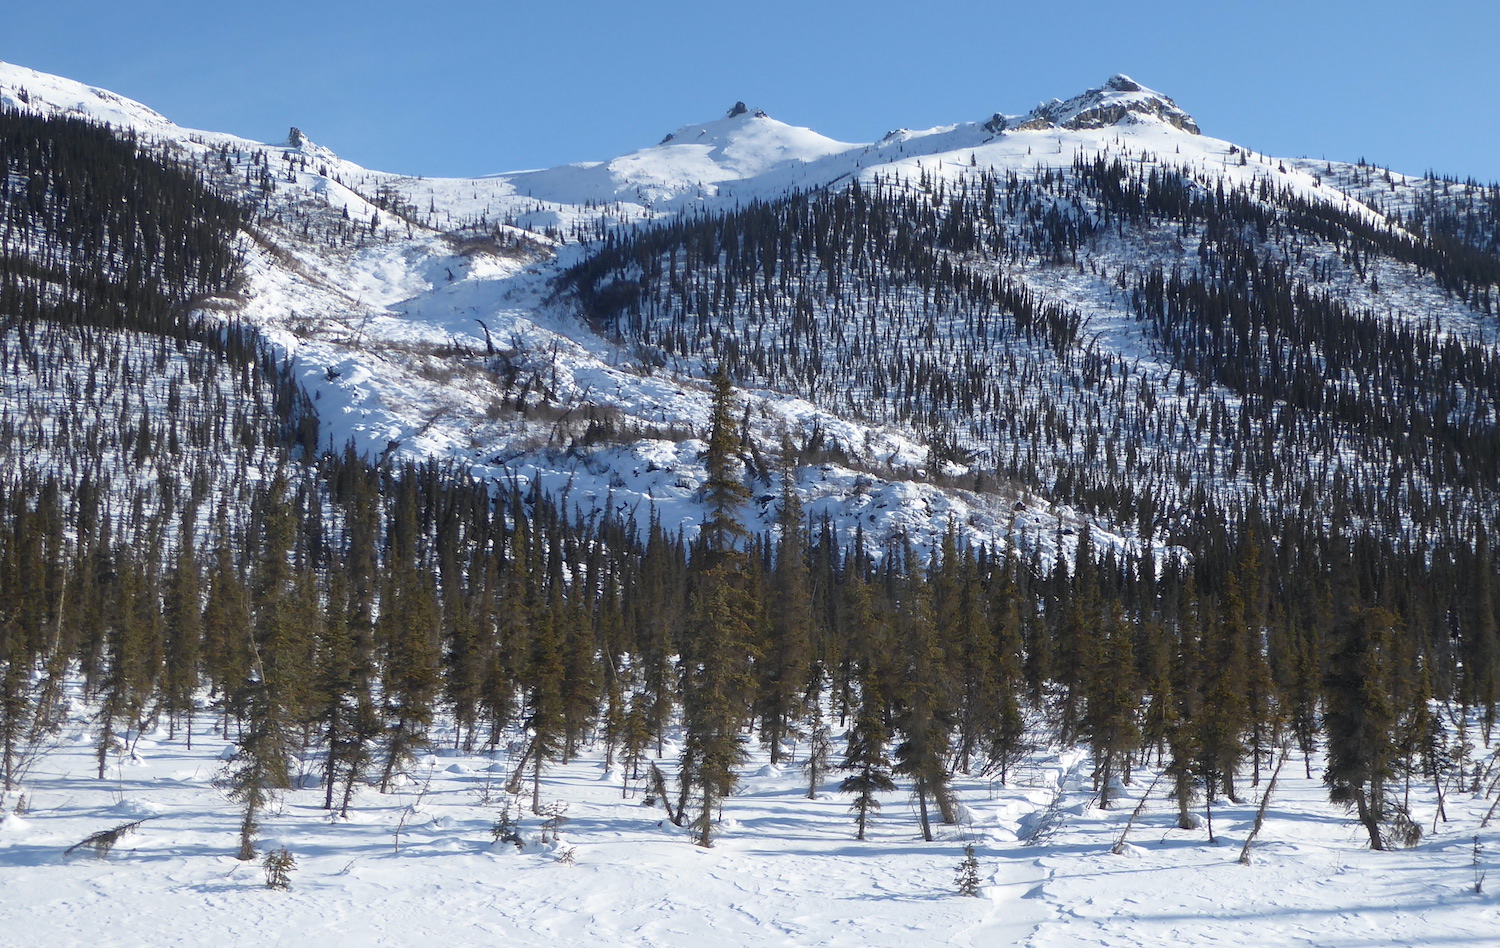 On a sunny day, a lobe of snow-covered rocks and jumbled trees fills a valley within mountains with spruce trees on their lower slopes.